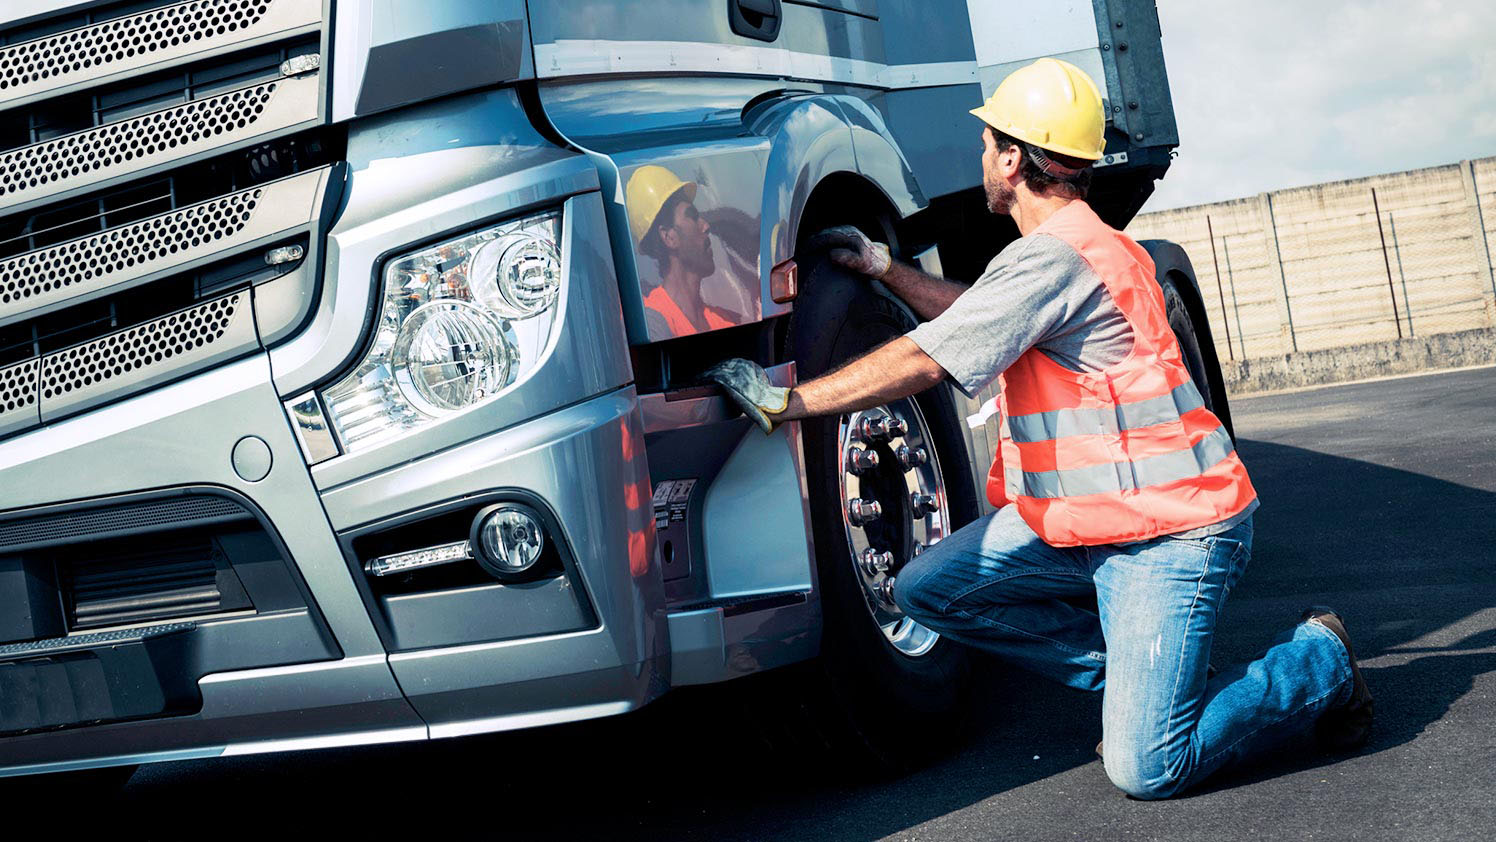 Man kneeling next to a truck checking its tire